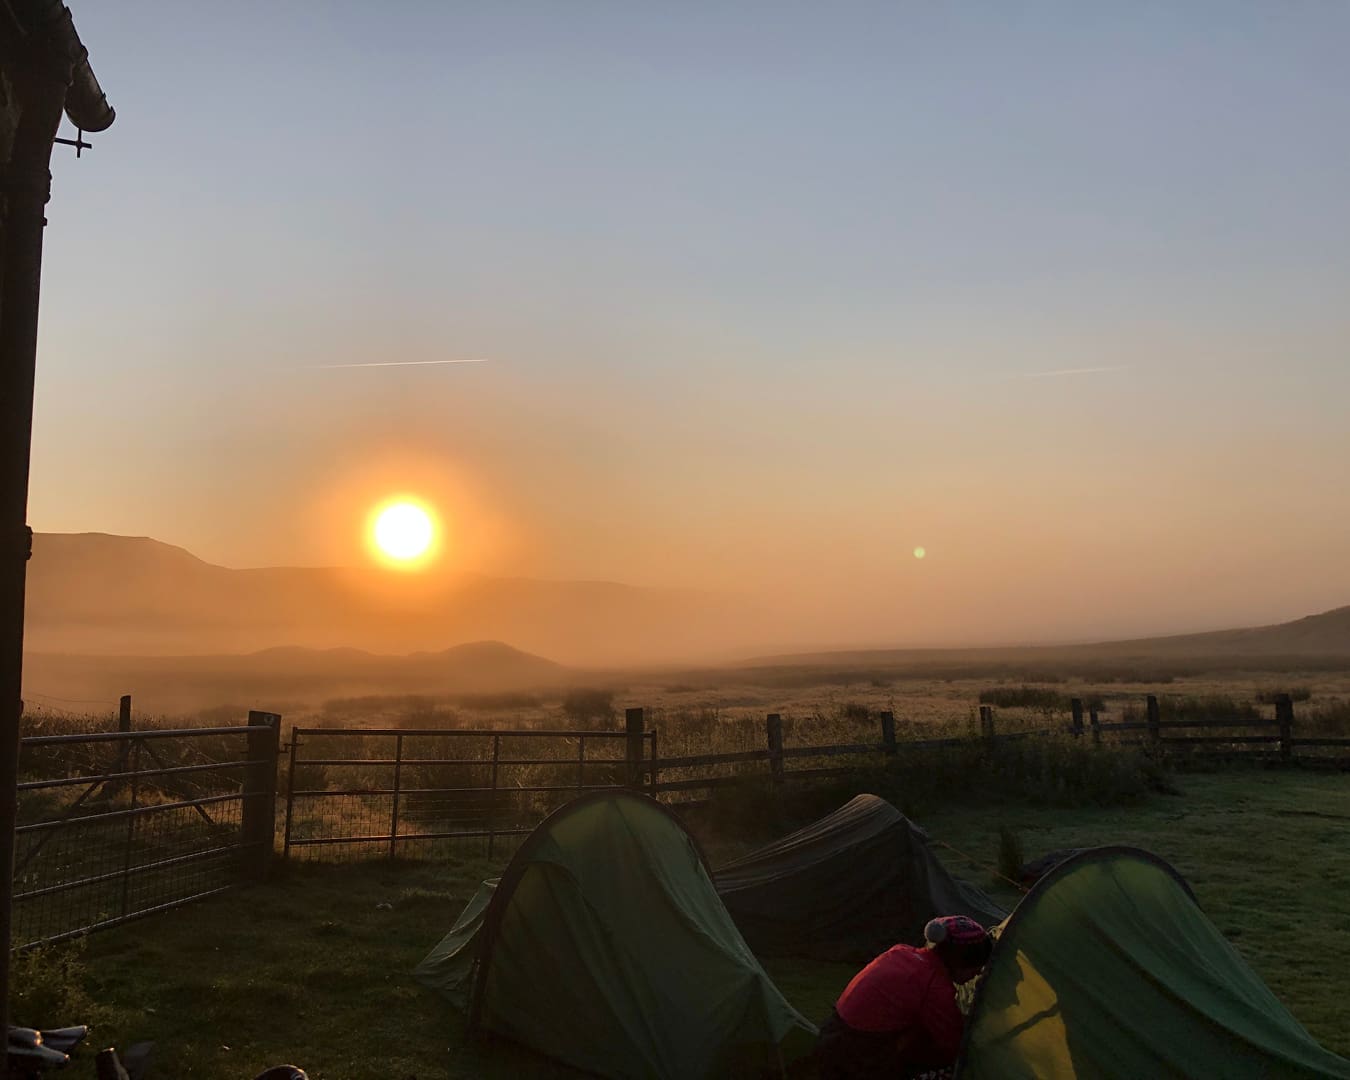 A complete guide to bikepacking in the UK | Sunrise over tents pitched outside a bothy in mid Wales.